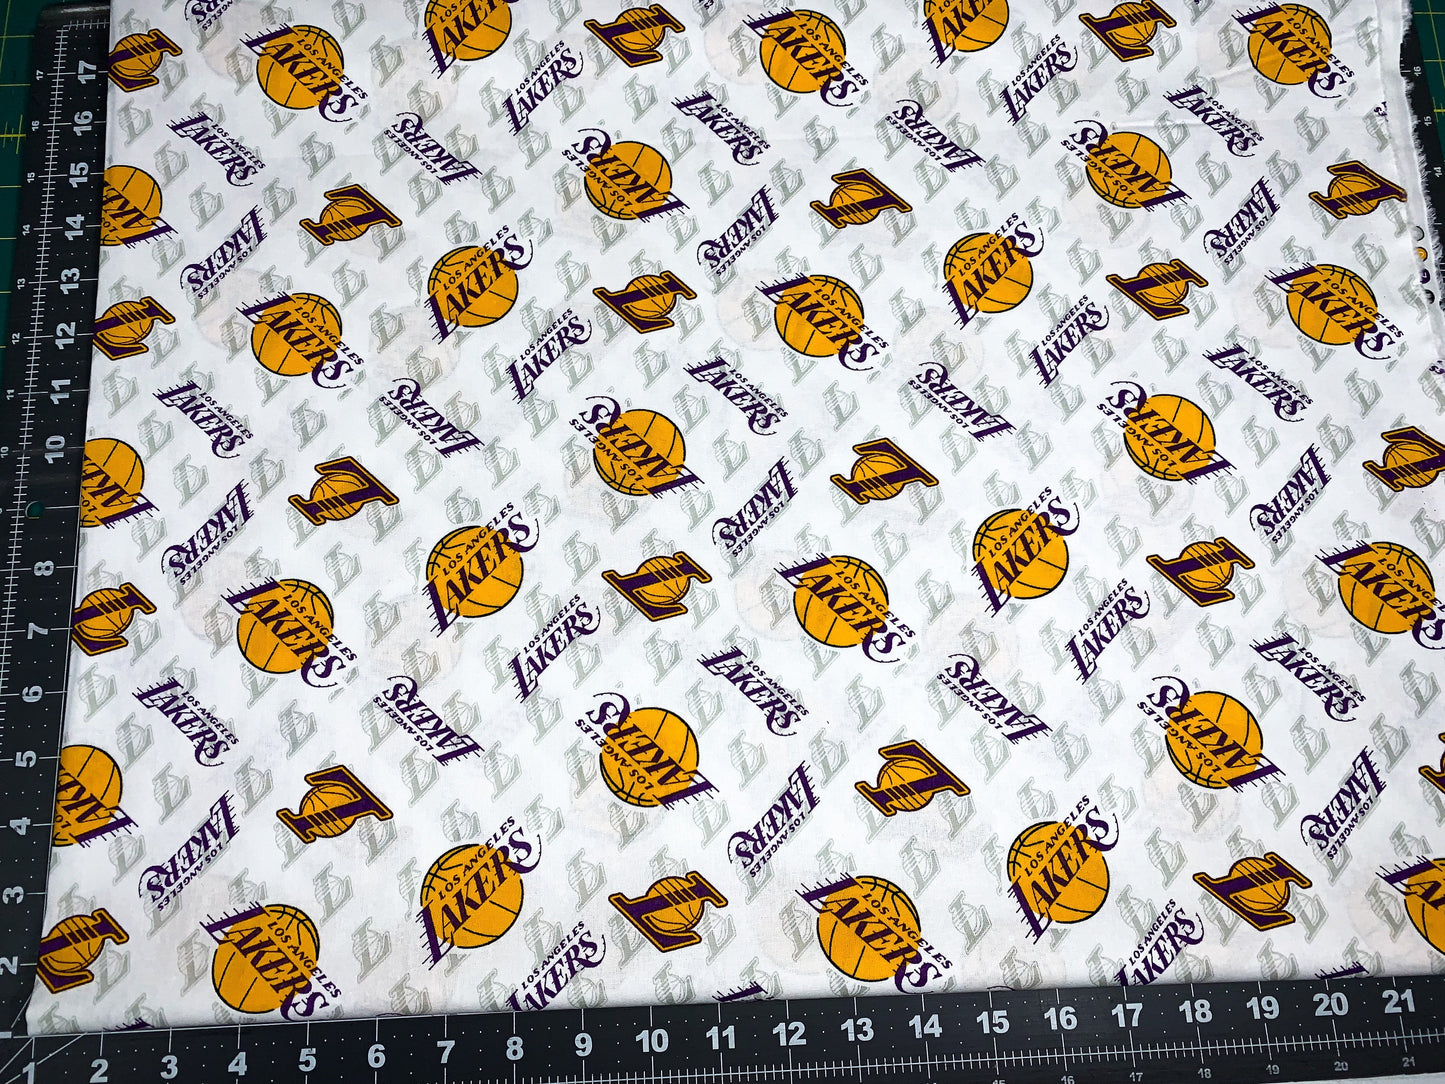 Los Angeles Lakers fabric 83LAL0 LA Lakers cotton fabric